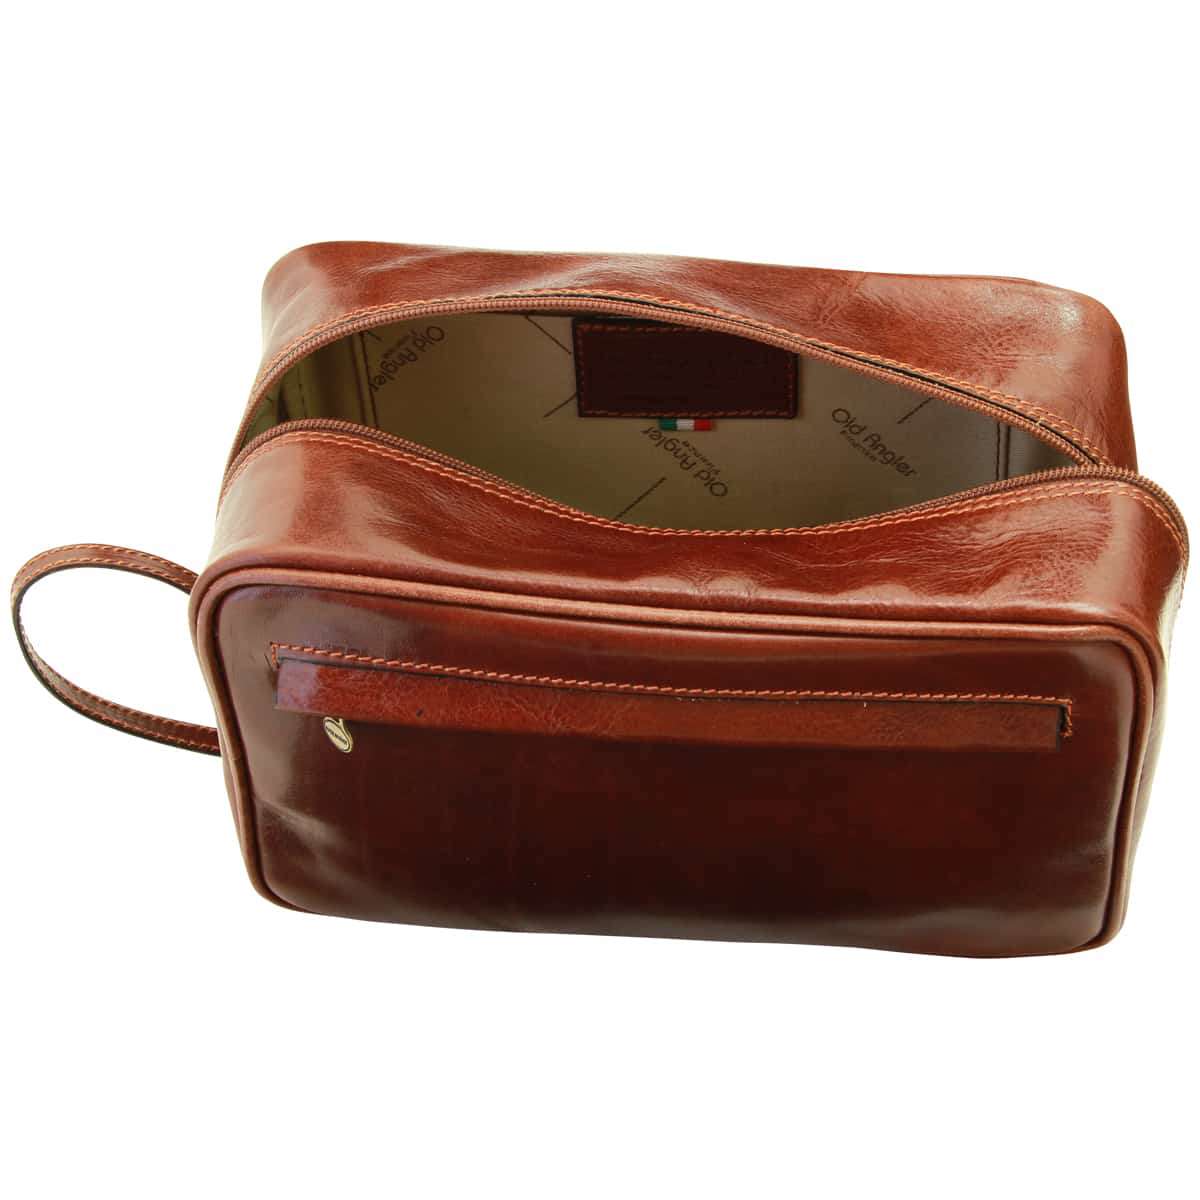 Leather Beauty Kit - Brown | 078905MA US | Old Angler Firenze